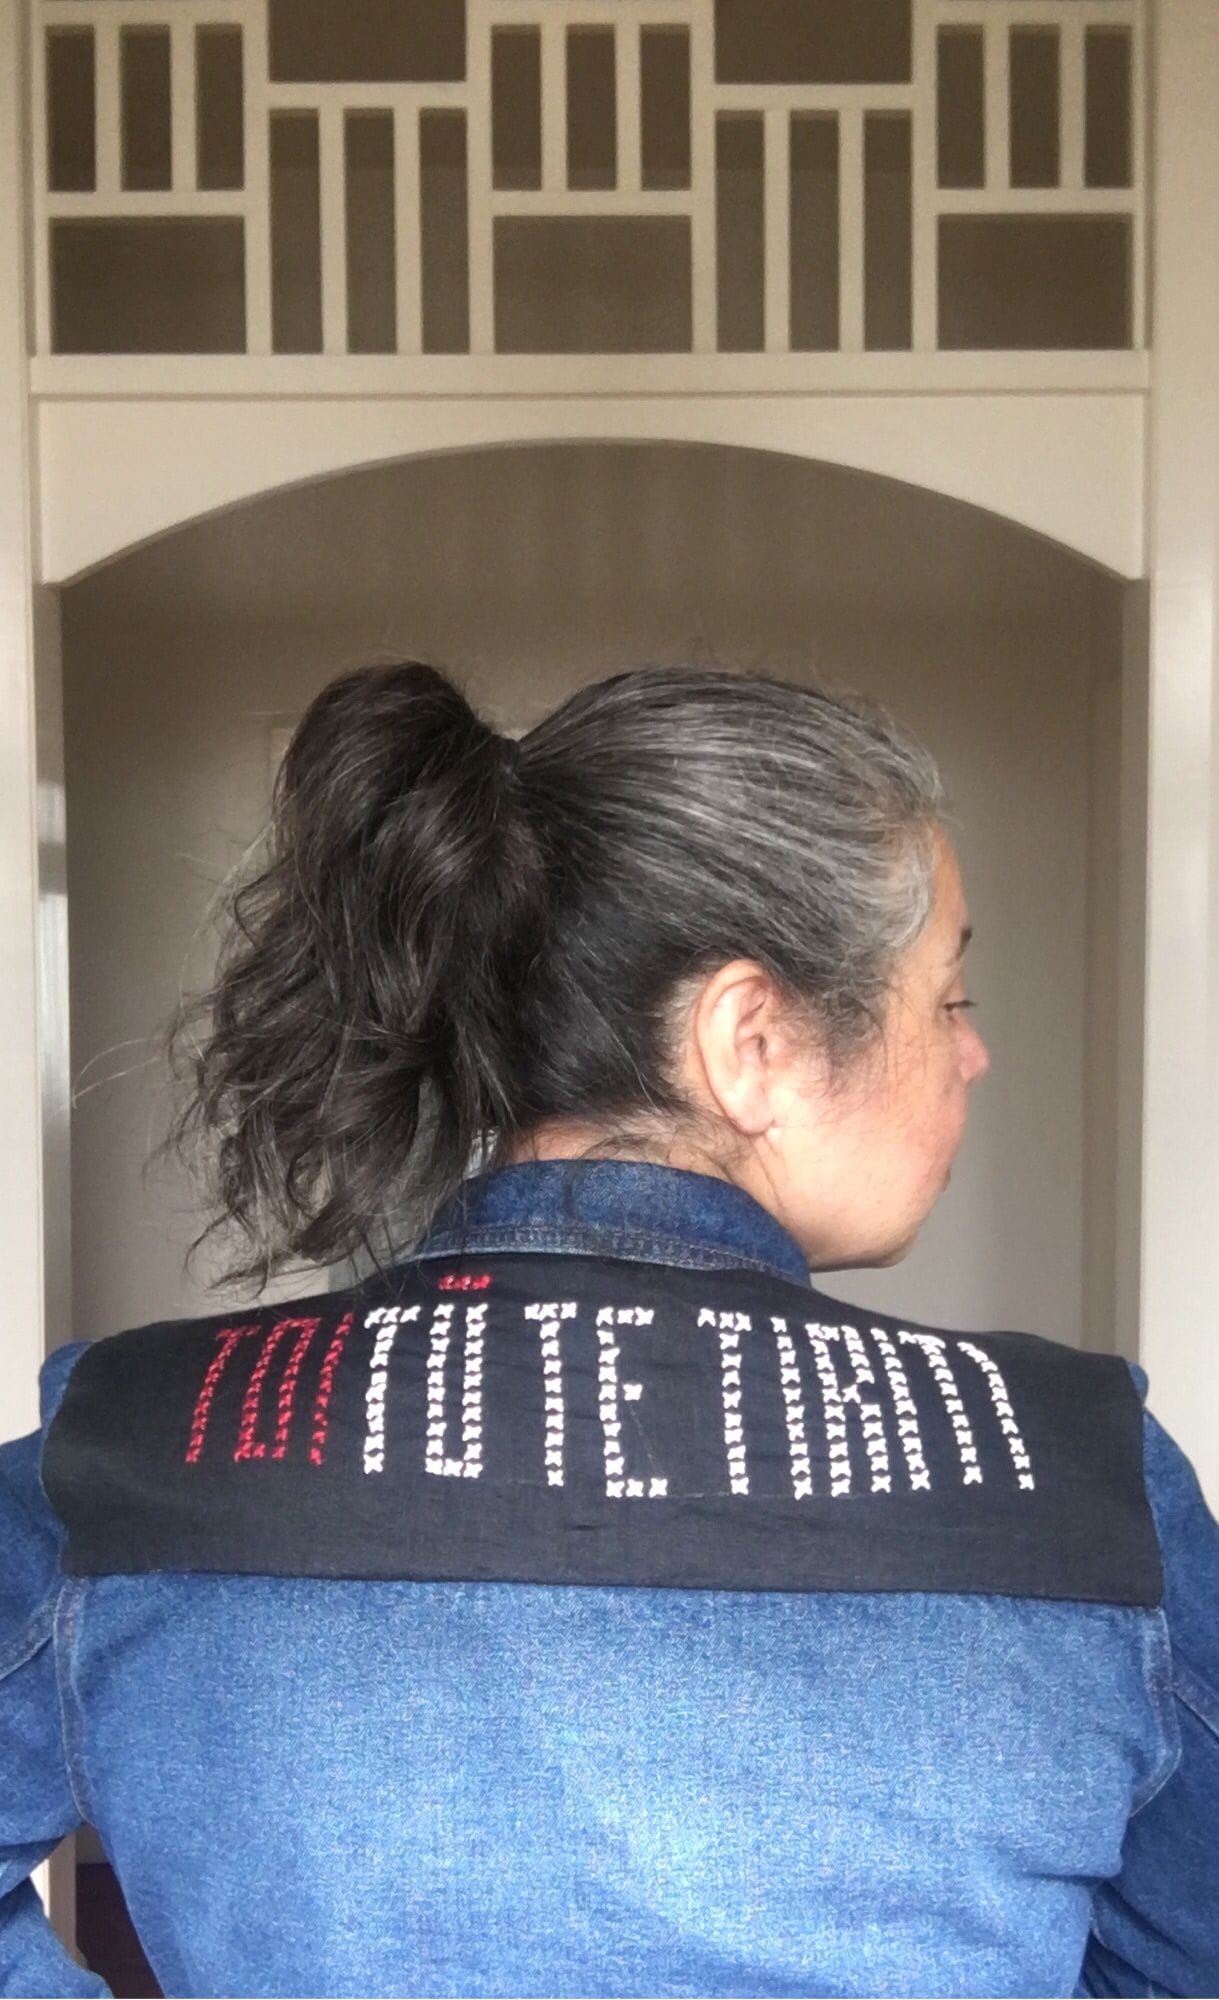 Photo of a middle aged wahine Māori wearing a denim jacket with a “TOITŪ TE TIRITI” cross stitched patch across the shoulders.